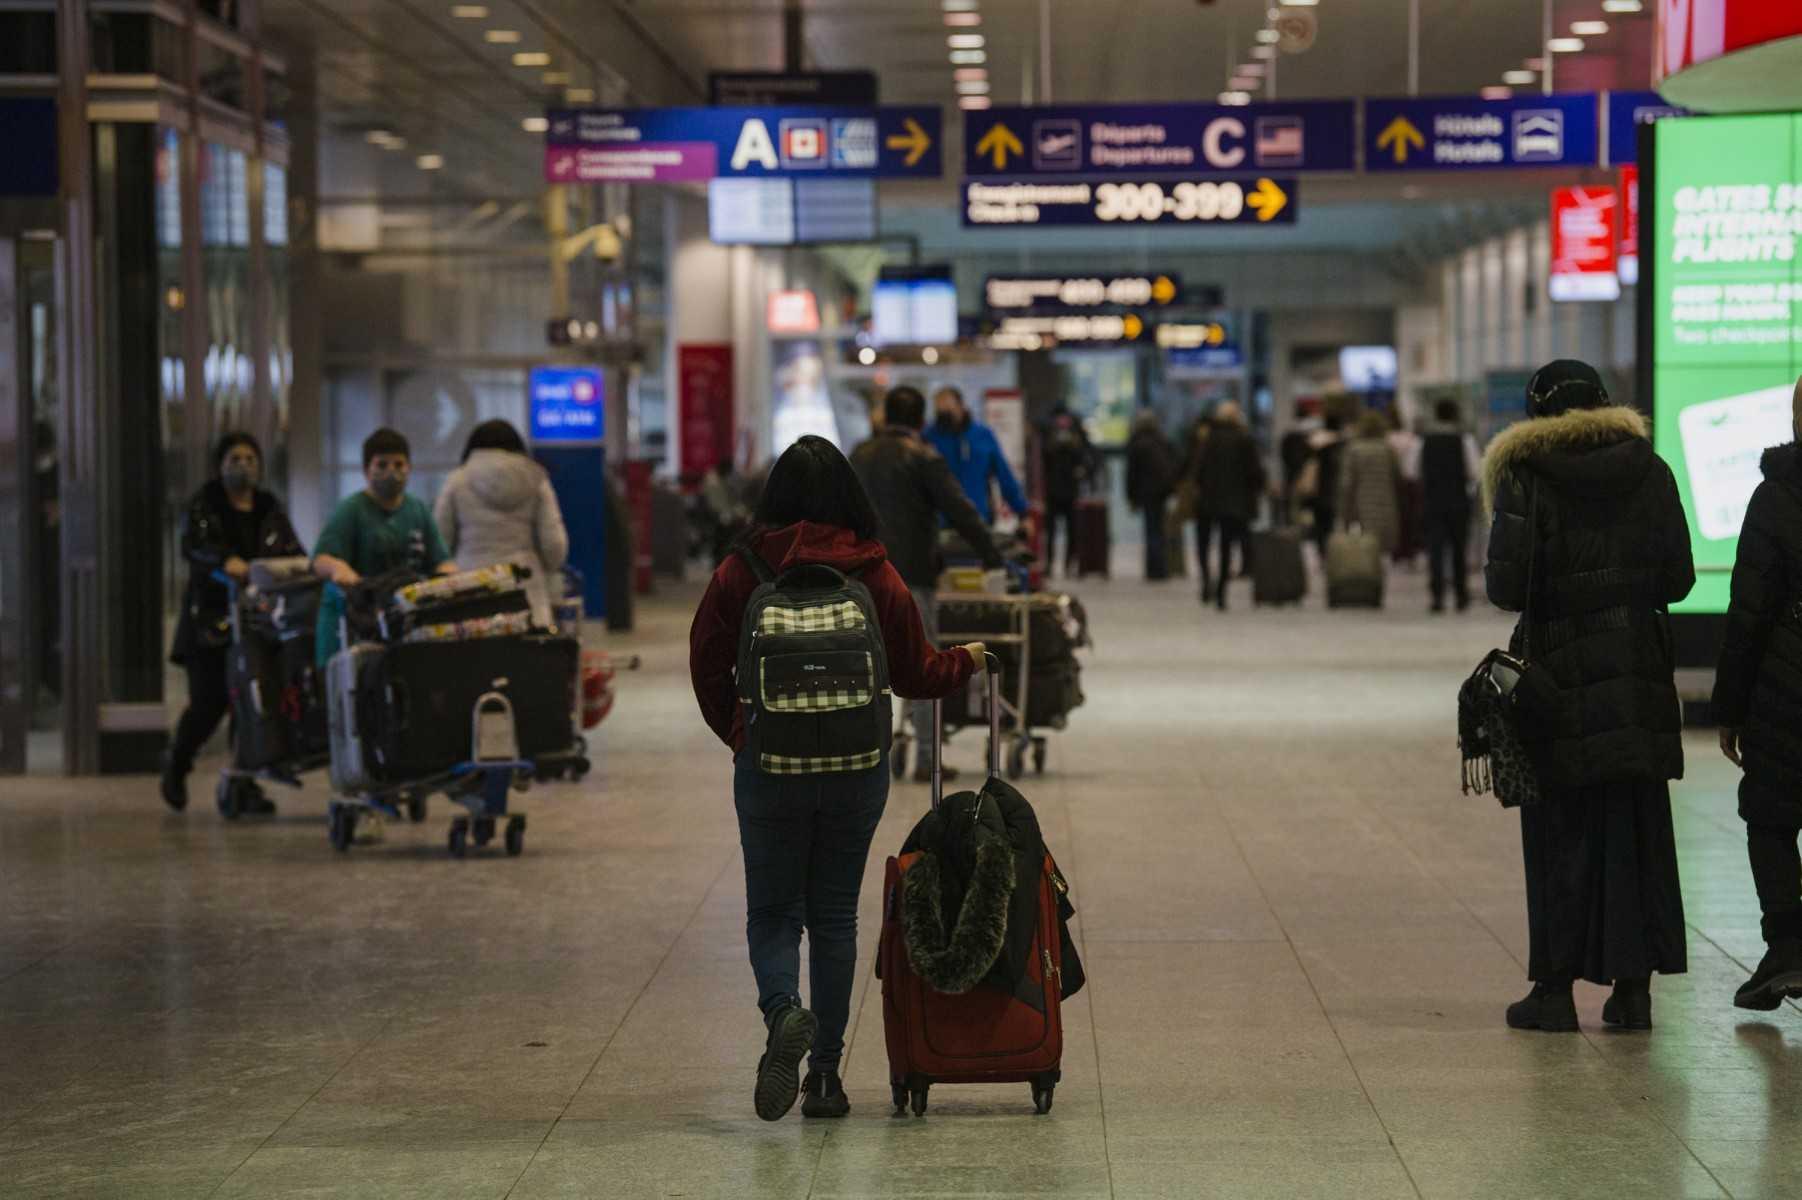 Travellers walk through the terminal at Montreal-Pierre Elliott Trudeau International Airport during a winter storm in Montreal, Quebec on Jan 17. Photo: AFP